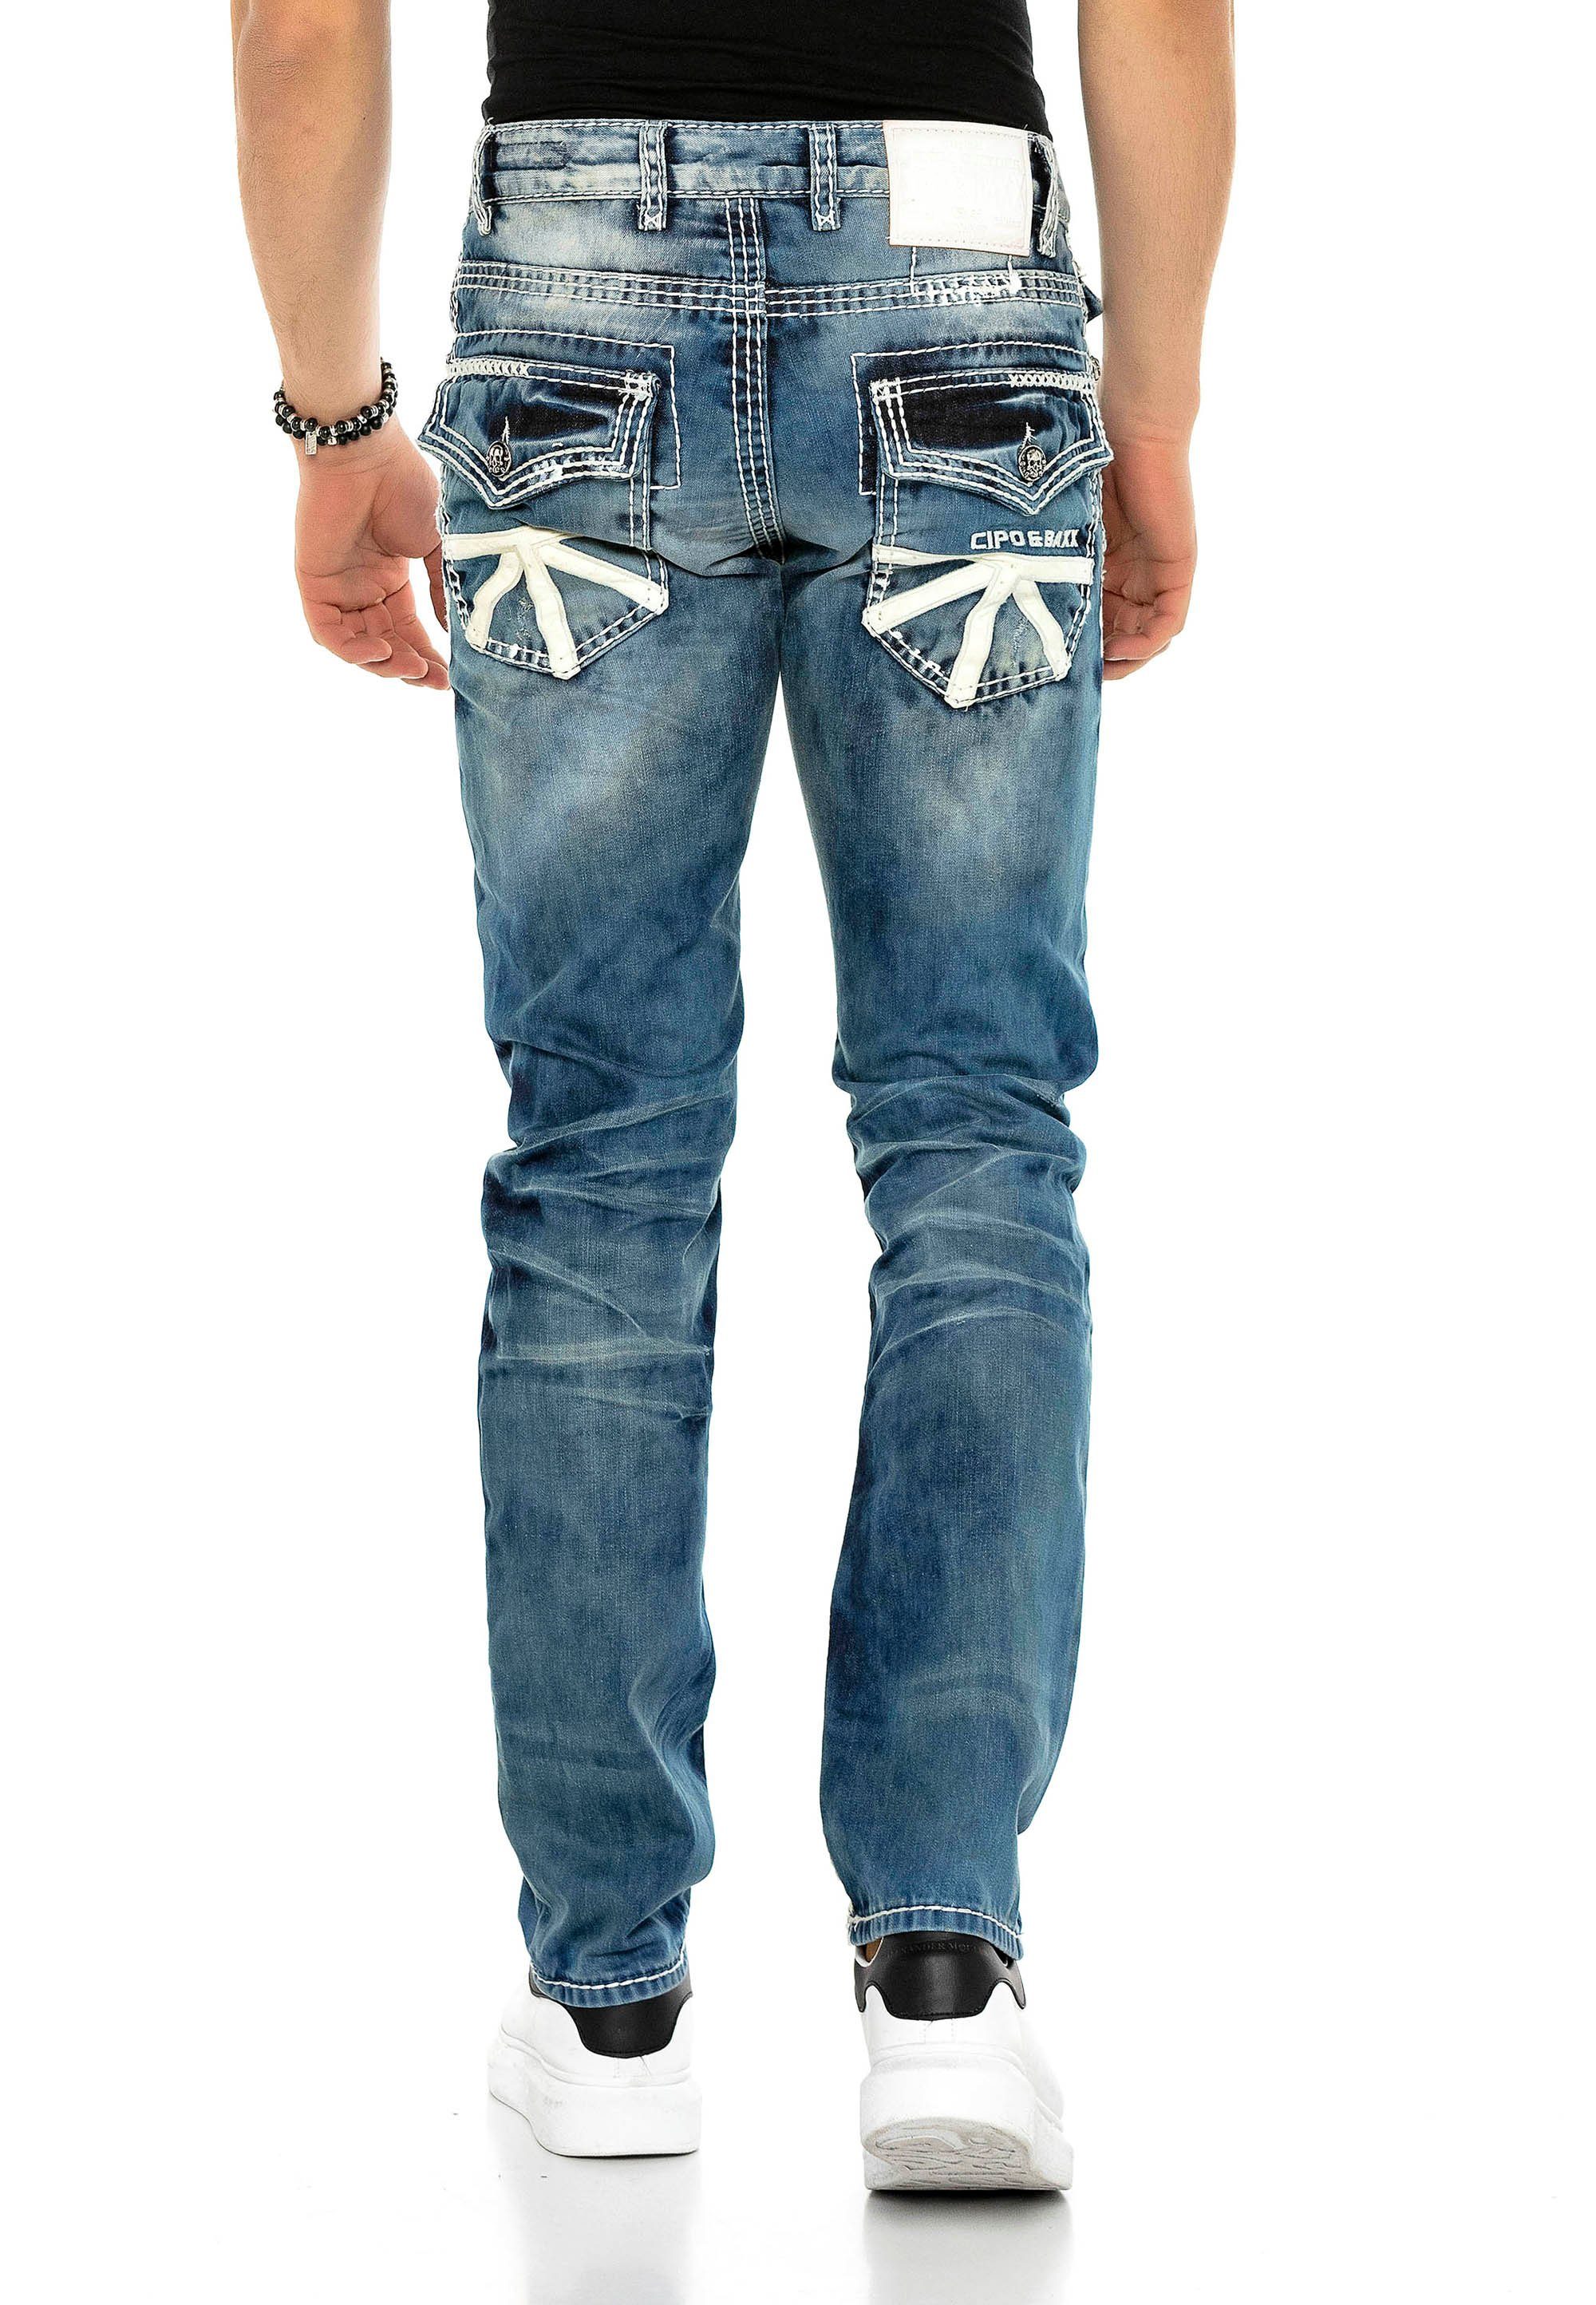 Cipo & Straight coolen Jeans Bequeme Used-Look Baxx Fit im